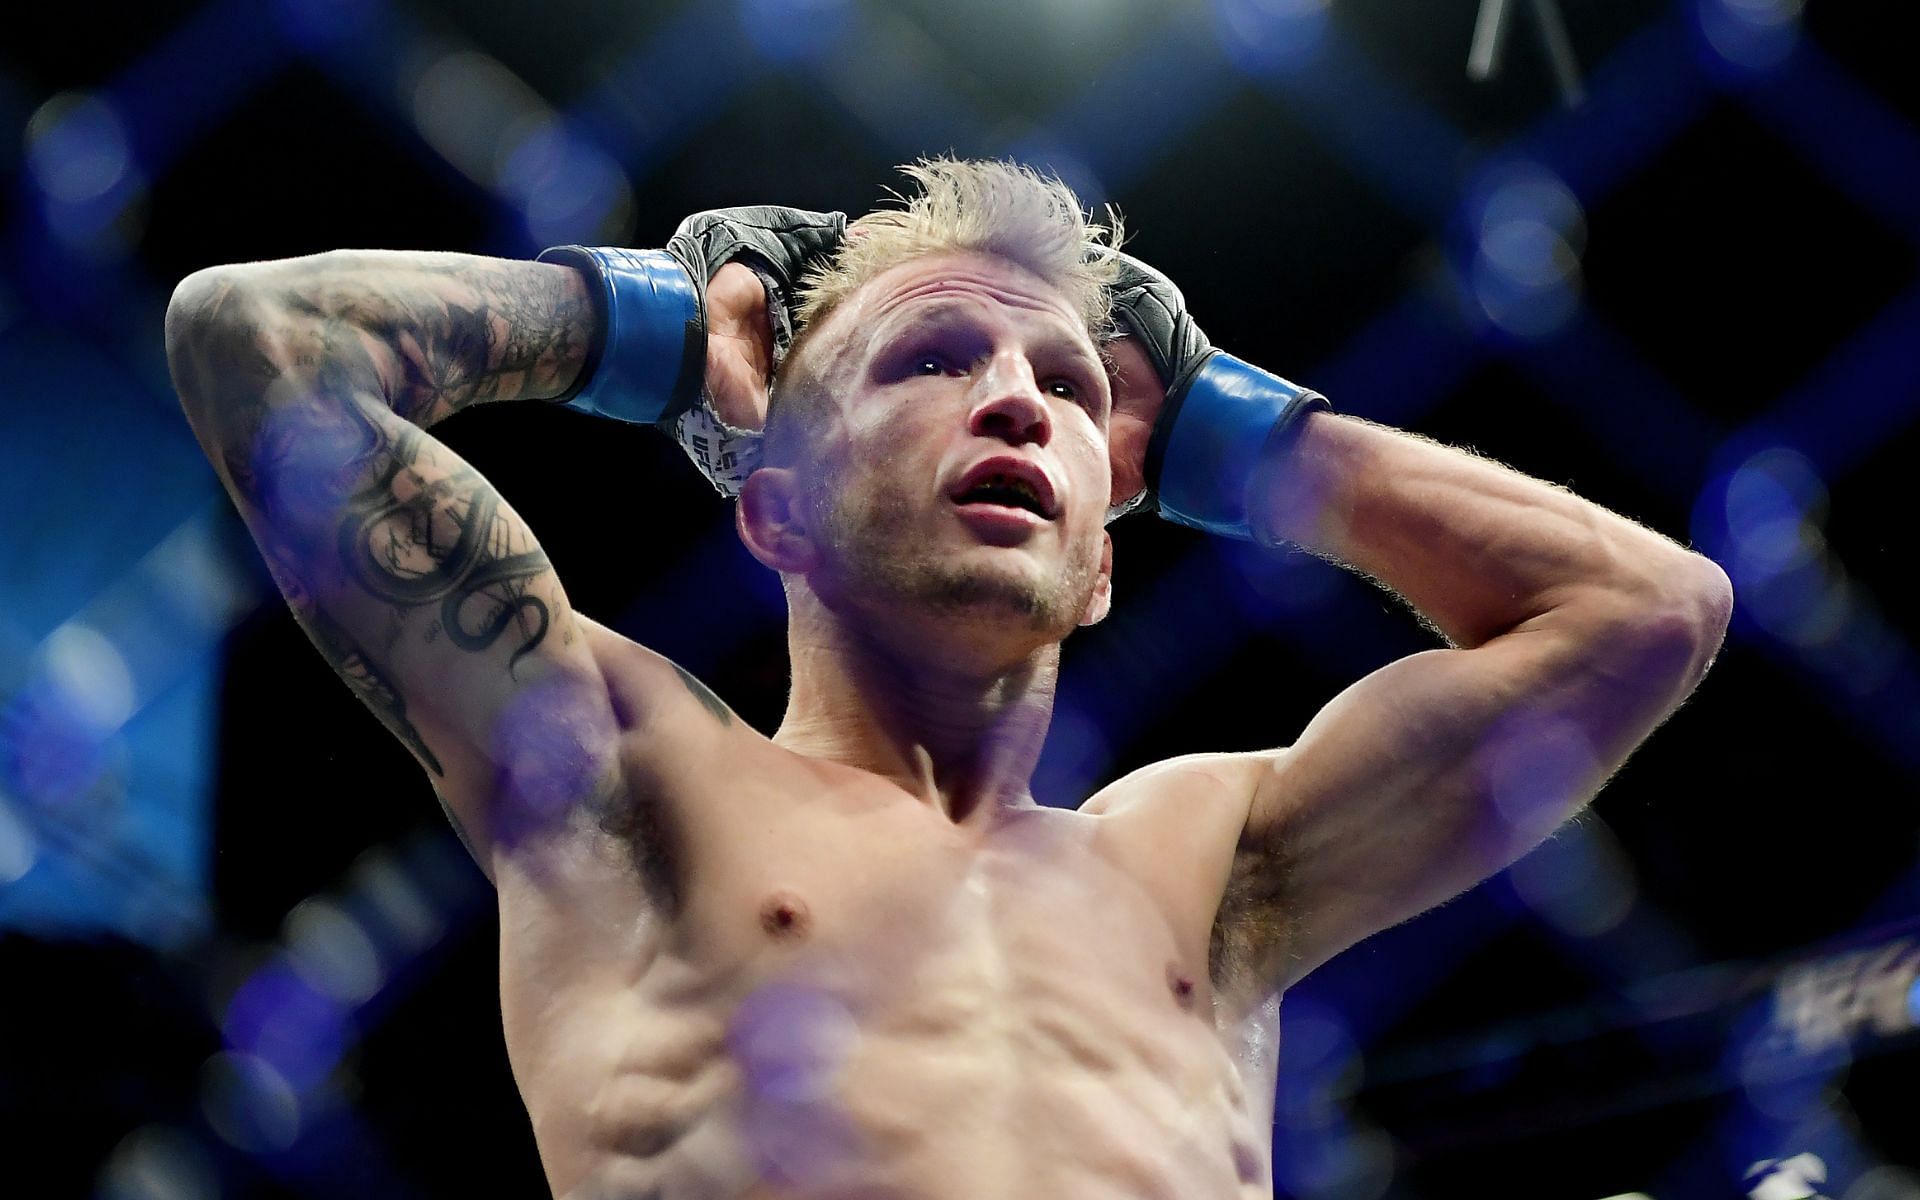 T.J. Dillashaw after losing at UFC Fight Night 143